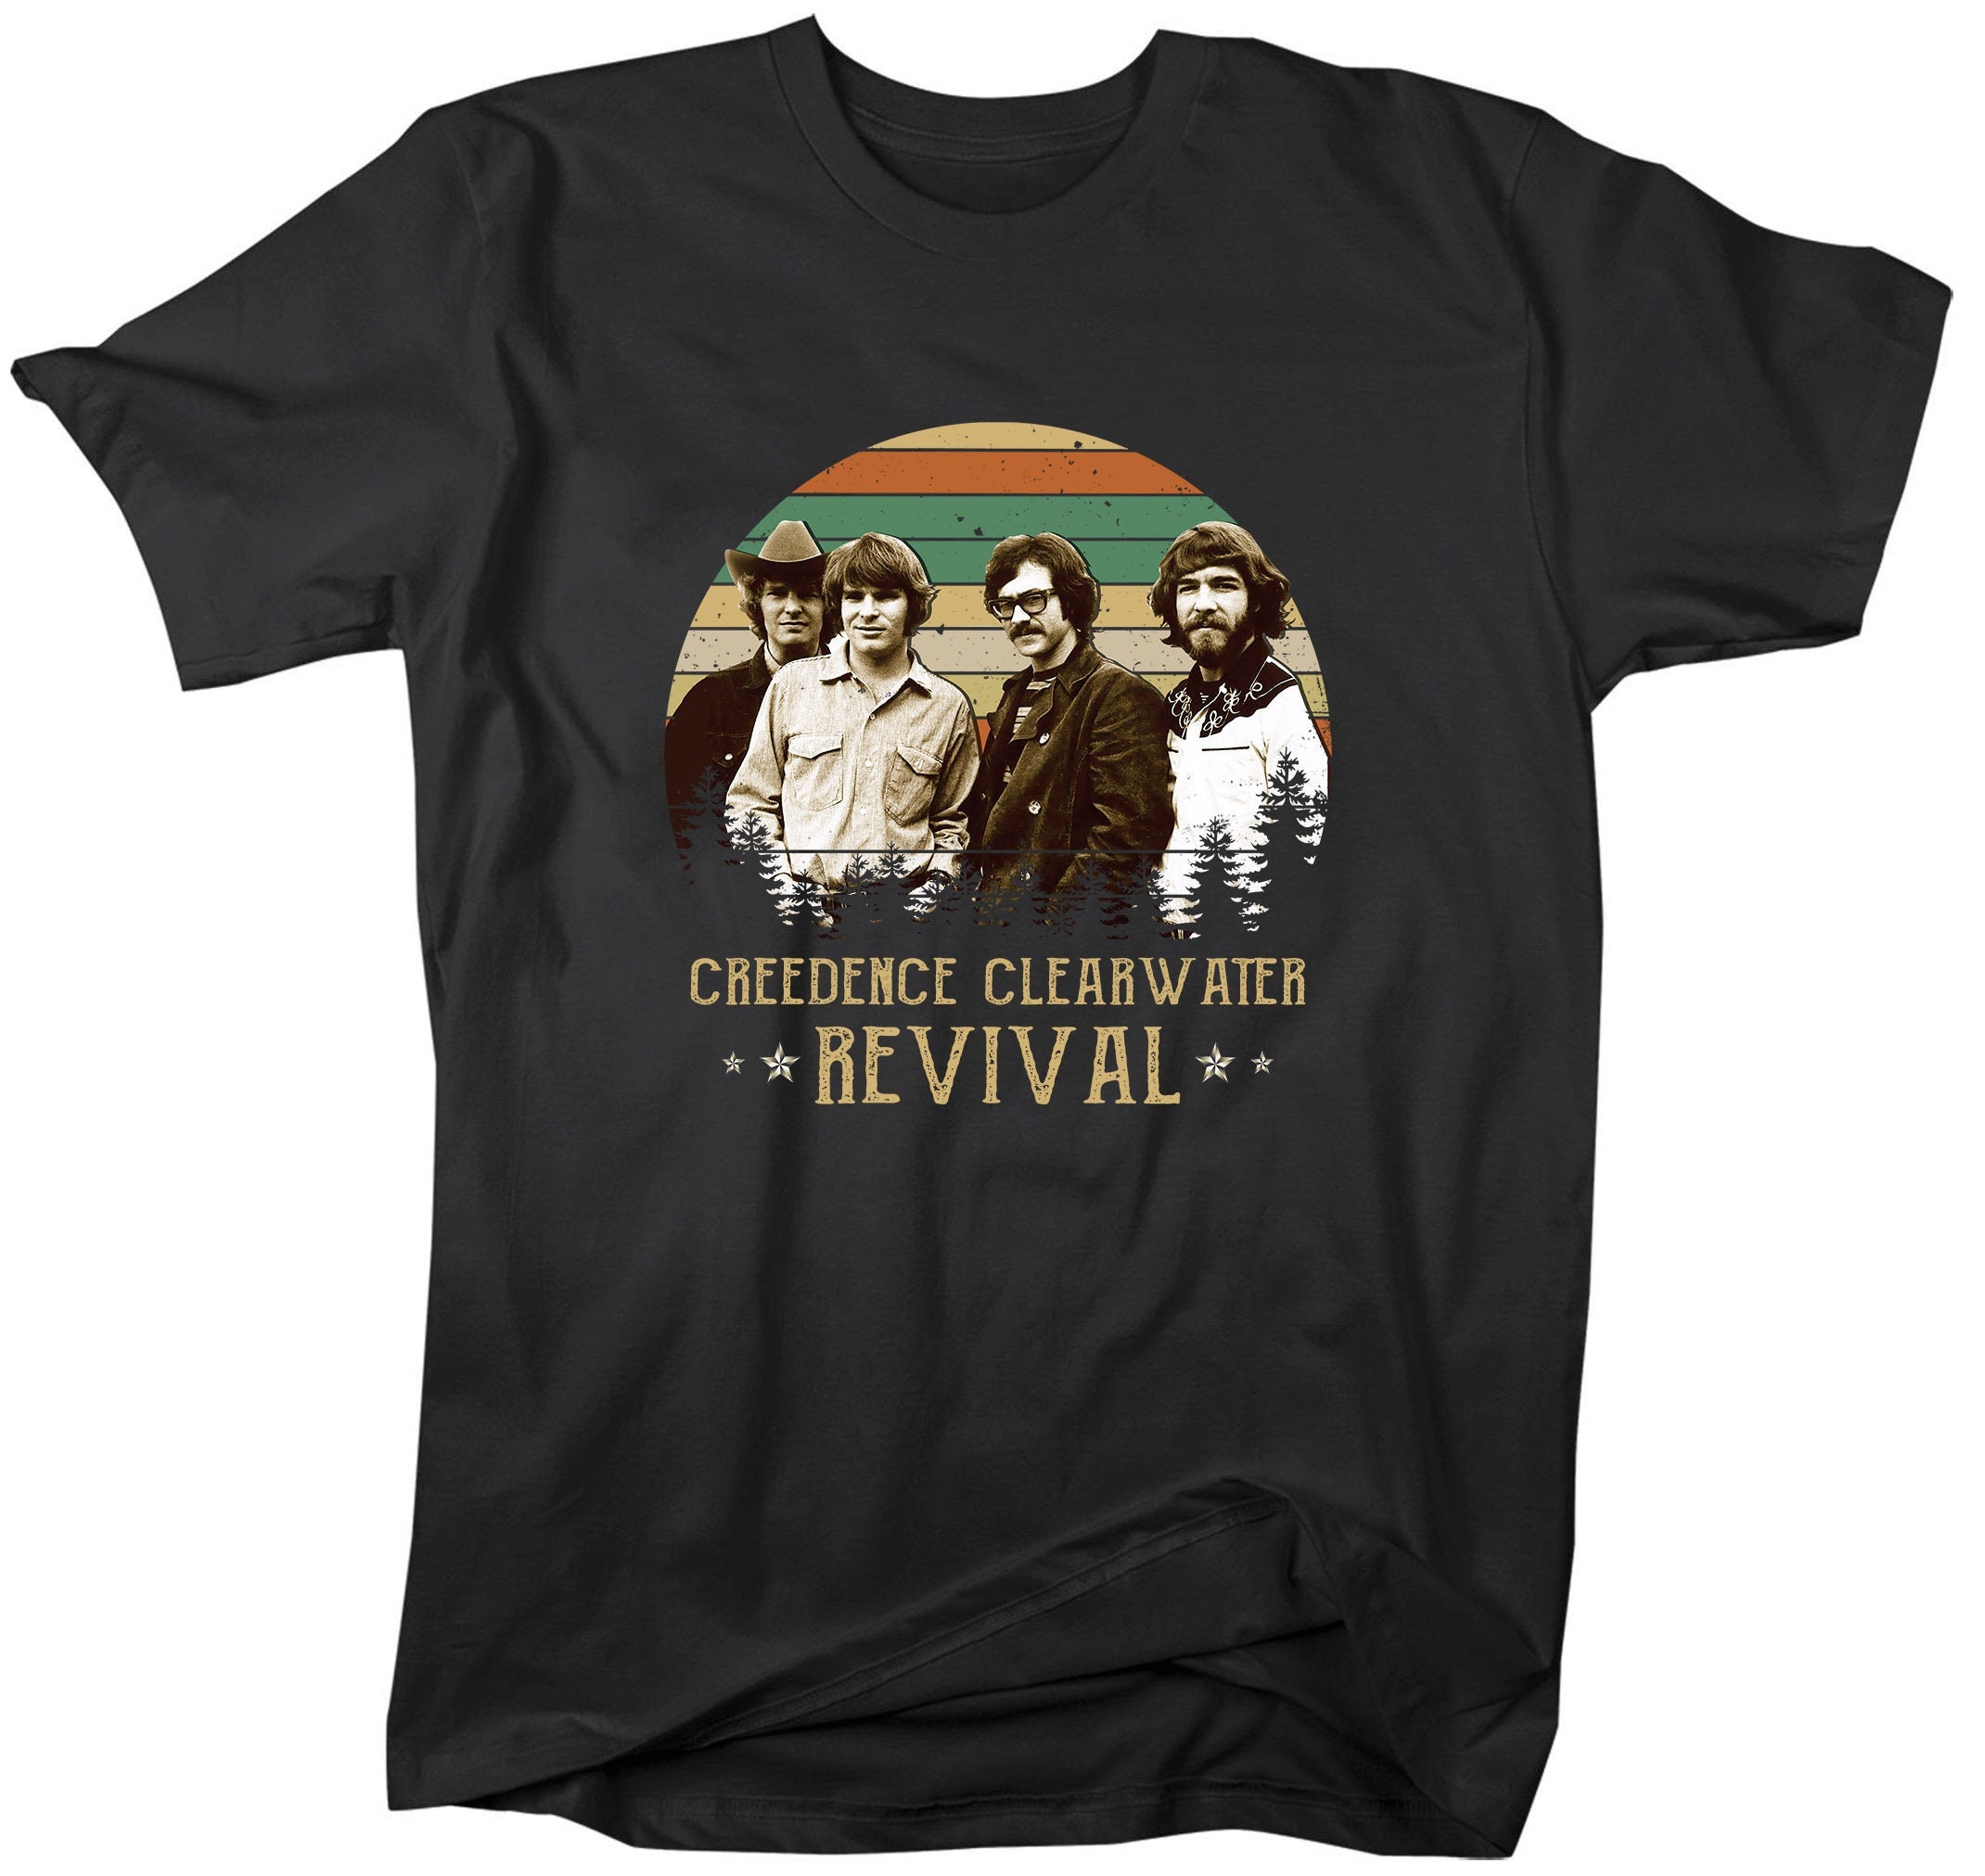 Retro Vintage Creedence Clearwater Revival Unisex T-Shirt